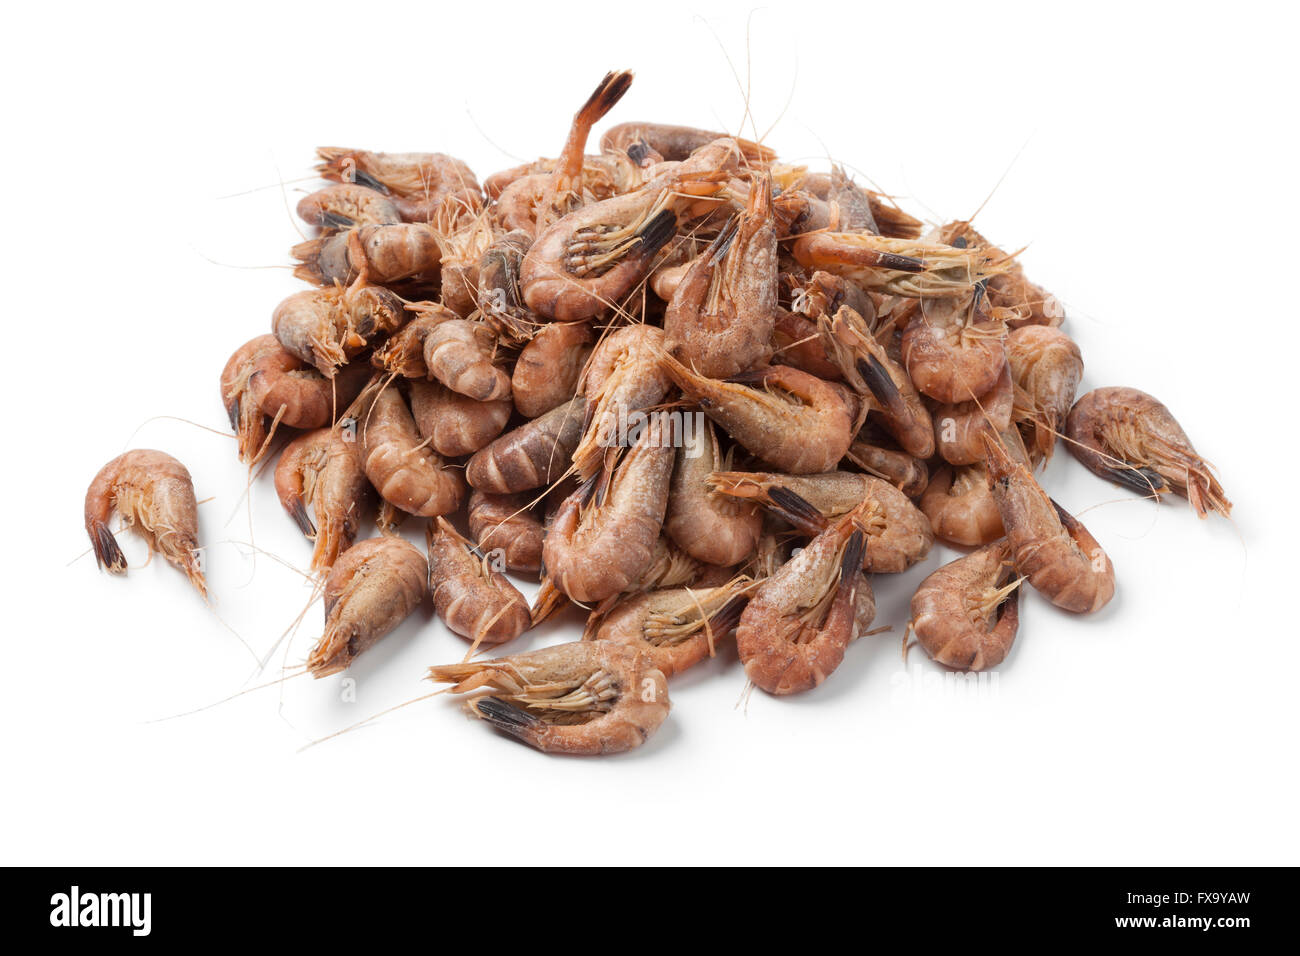 Heap of unpeeled brown shrimps on white background Stock Photo